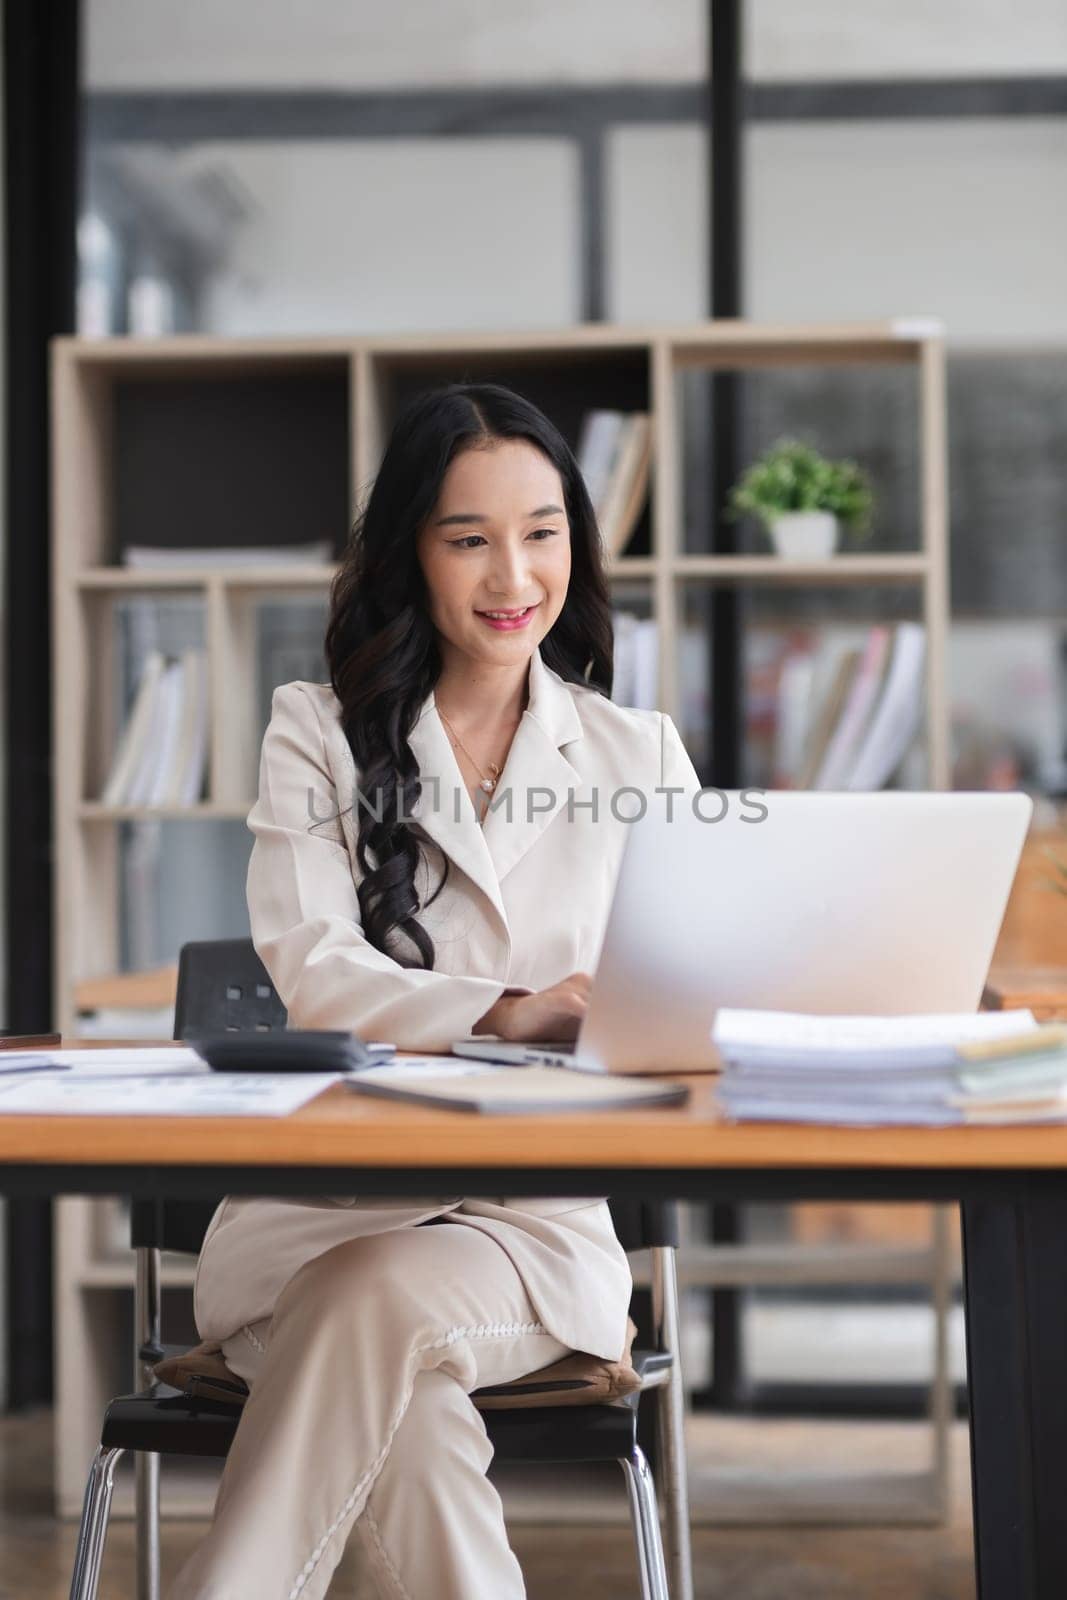 Asian businesswoman working on financial document with laptop on desk in office room.